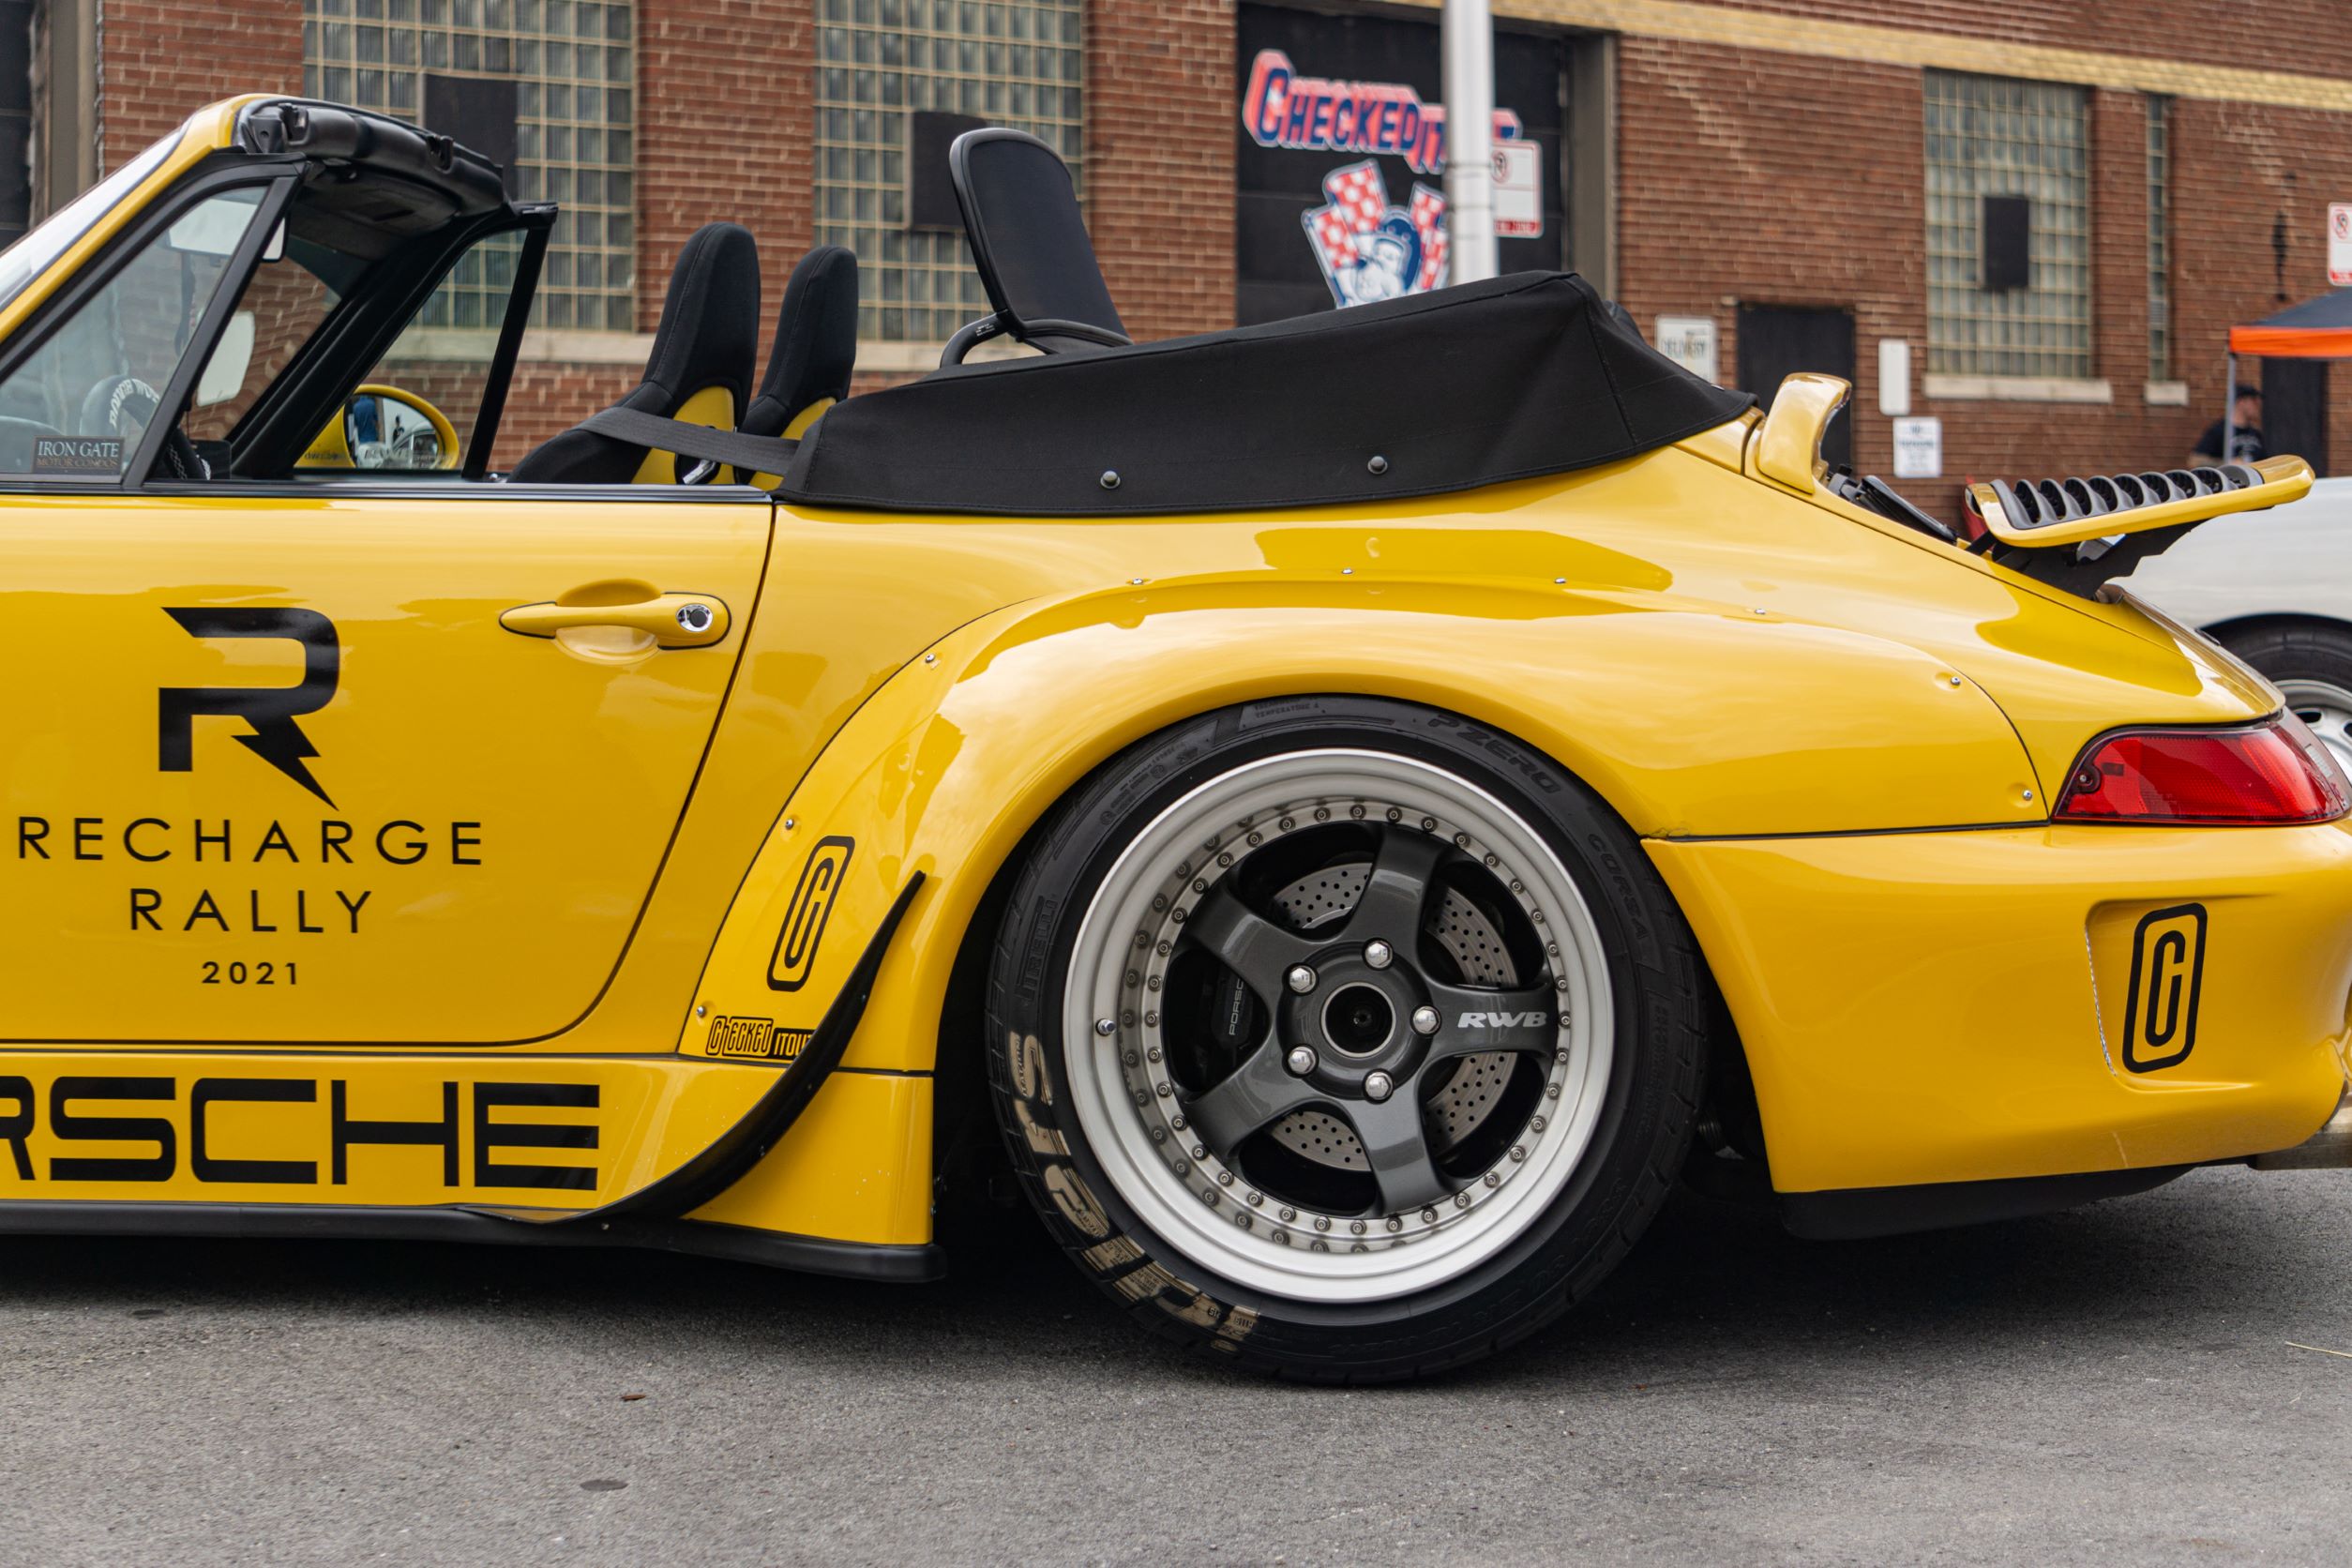 The rear wheel and fenders of the yellow-and-black RWB Porsche 993 911 Cabriolet 'Nohra'